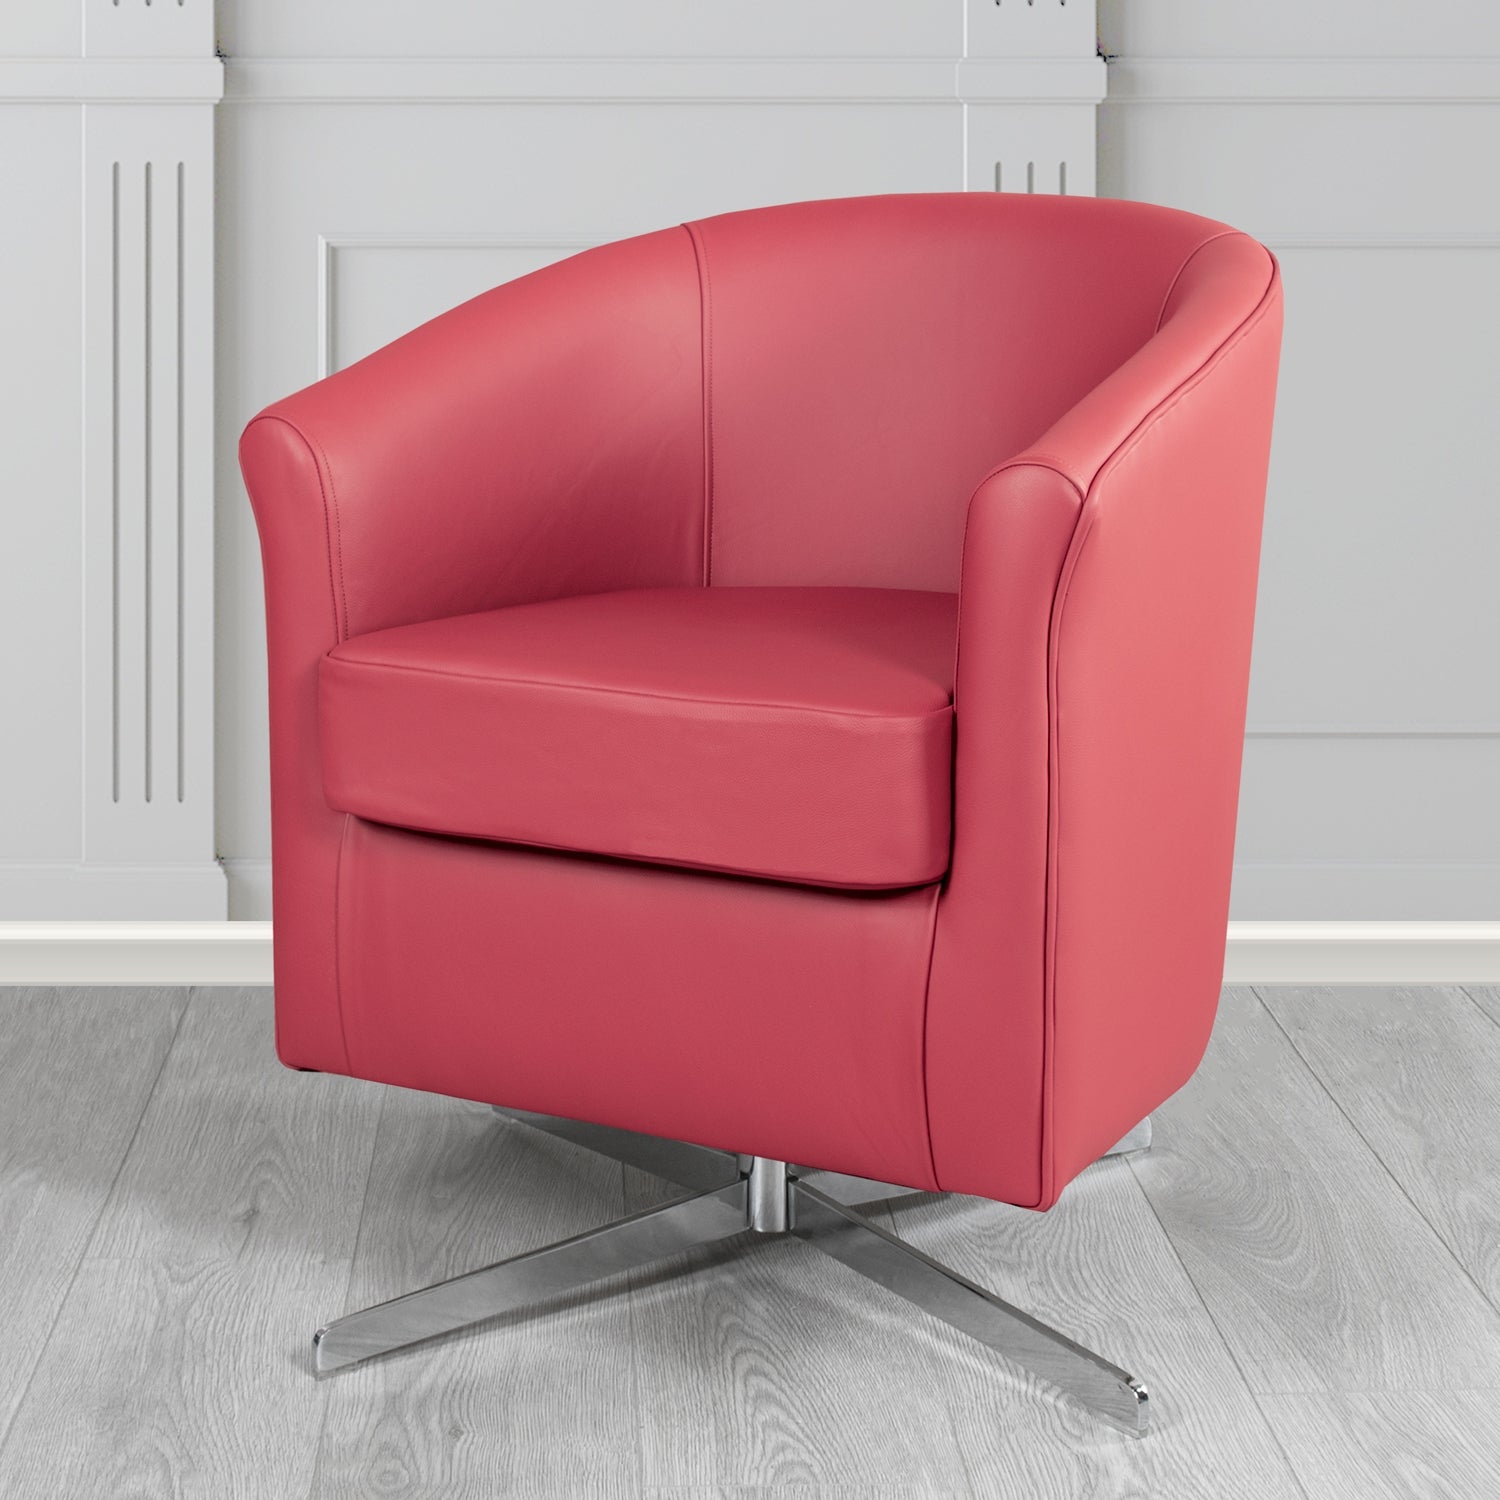 Cannes Swivel Tub Chair in Shelly Velvet Red Crib 5 Genuine Leather - The Tub Chair Shop